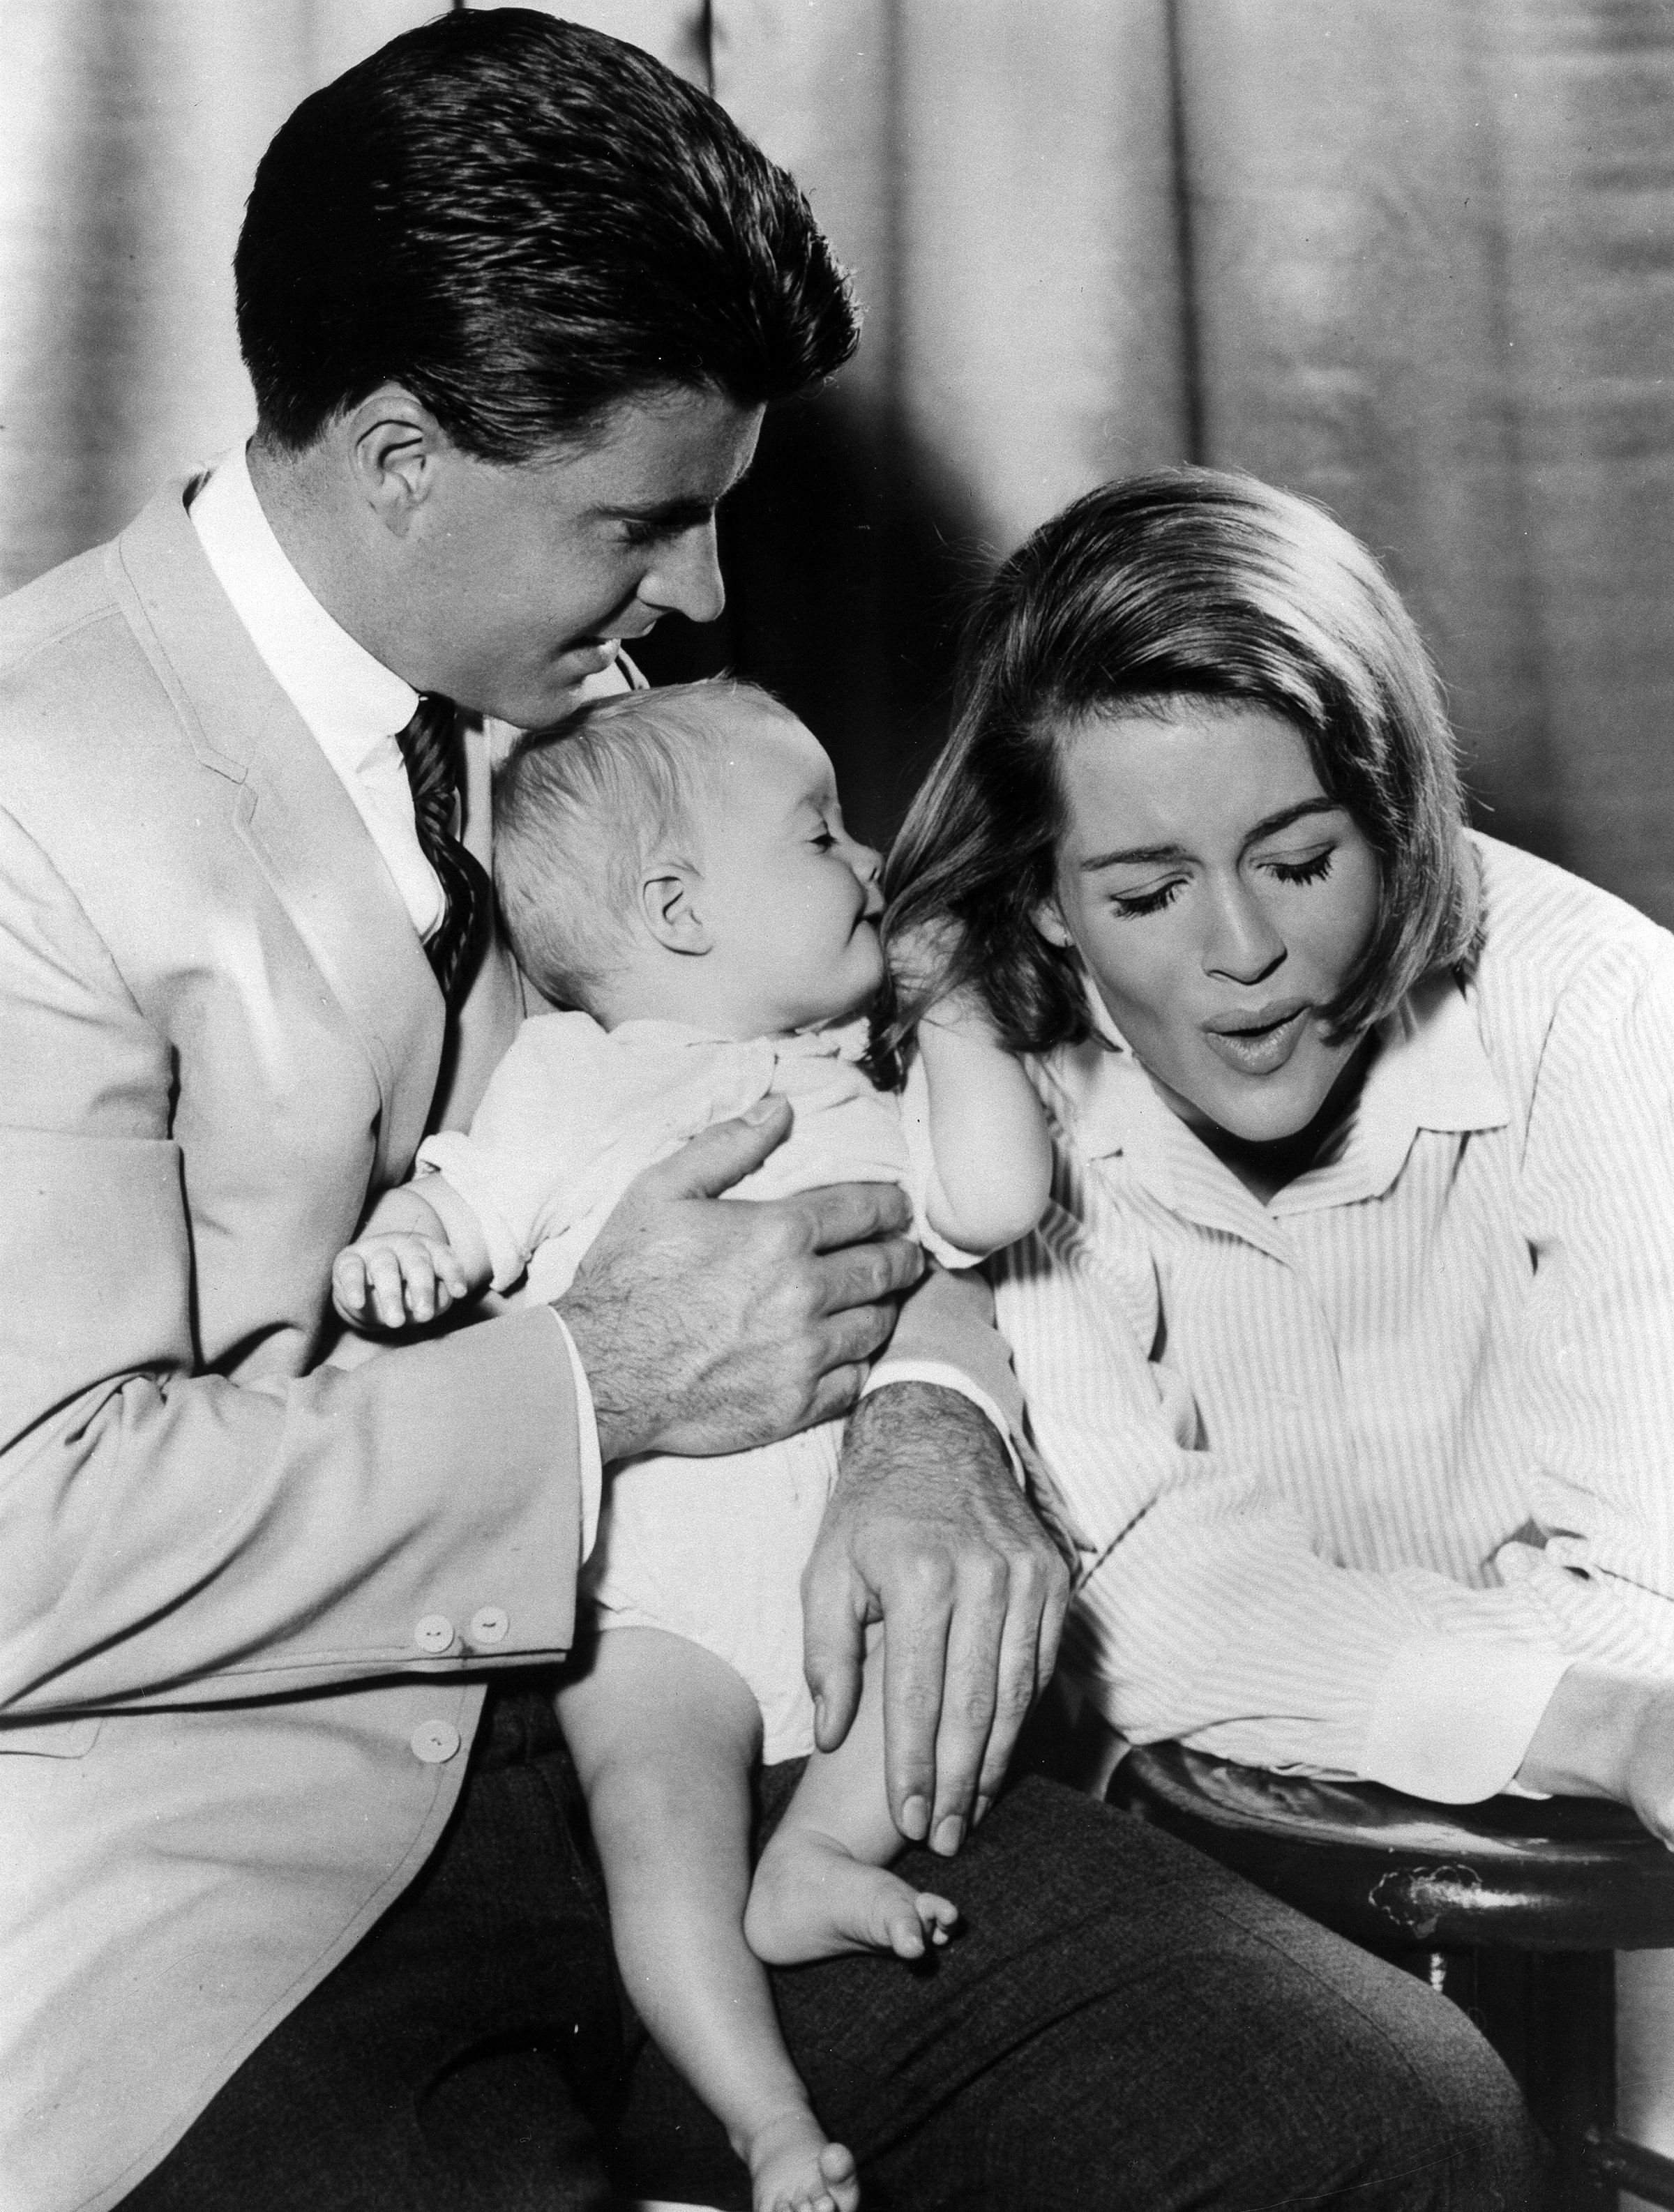 Ricky and Kristin Nelson, and their 6 month old daughter Tracy Nelson pose for a portrait in 1963 | Source: Getty Images